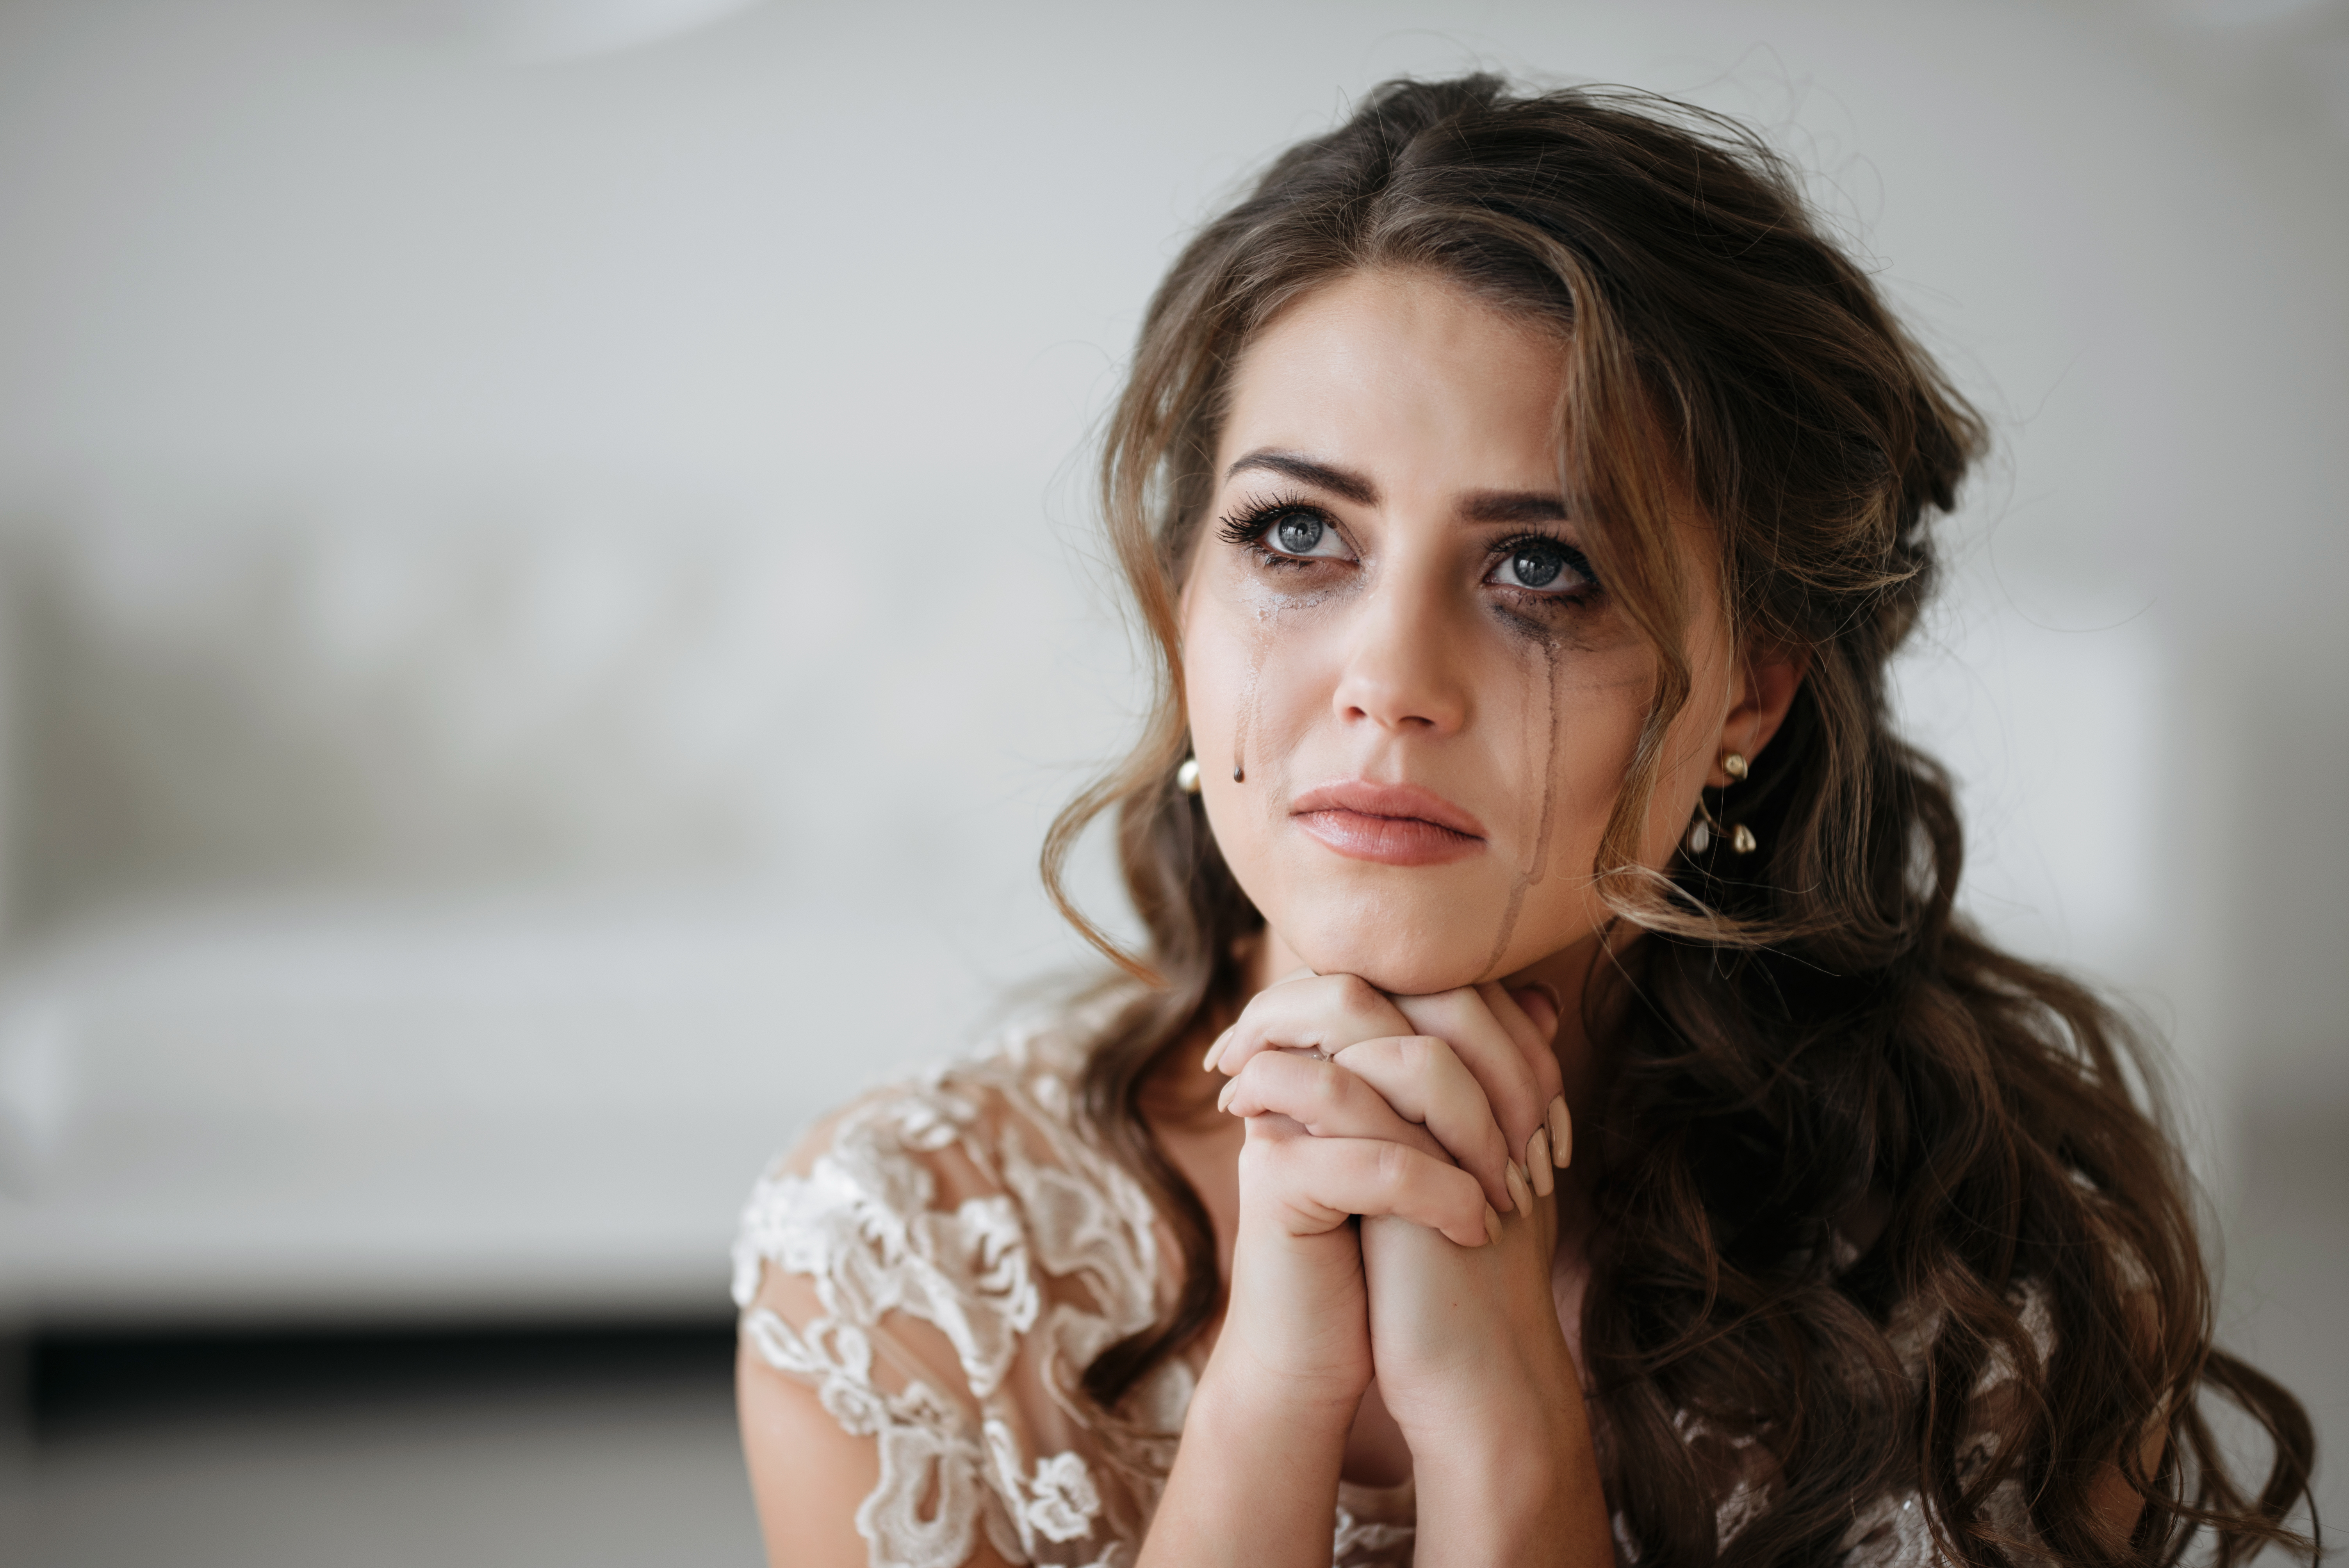 A bride crying on her wedding day | Source: Shutterstock